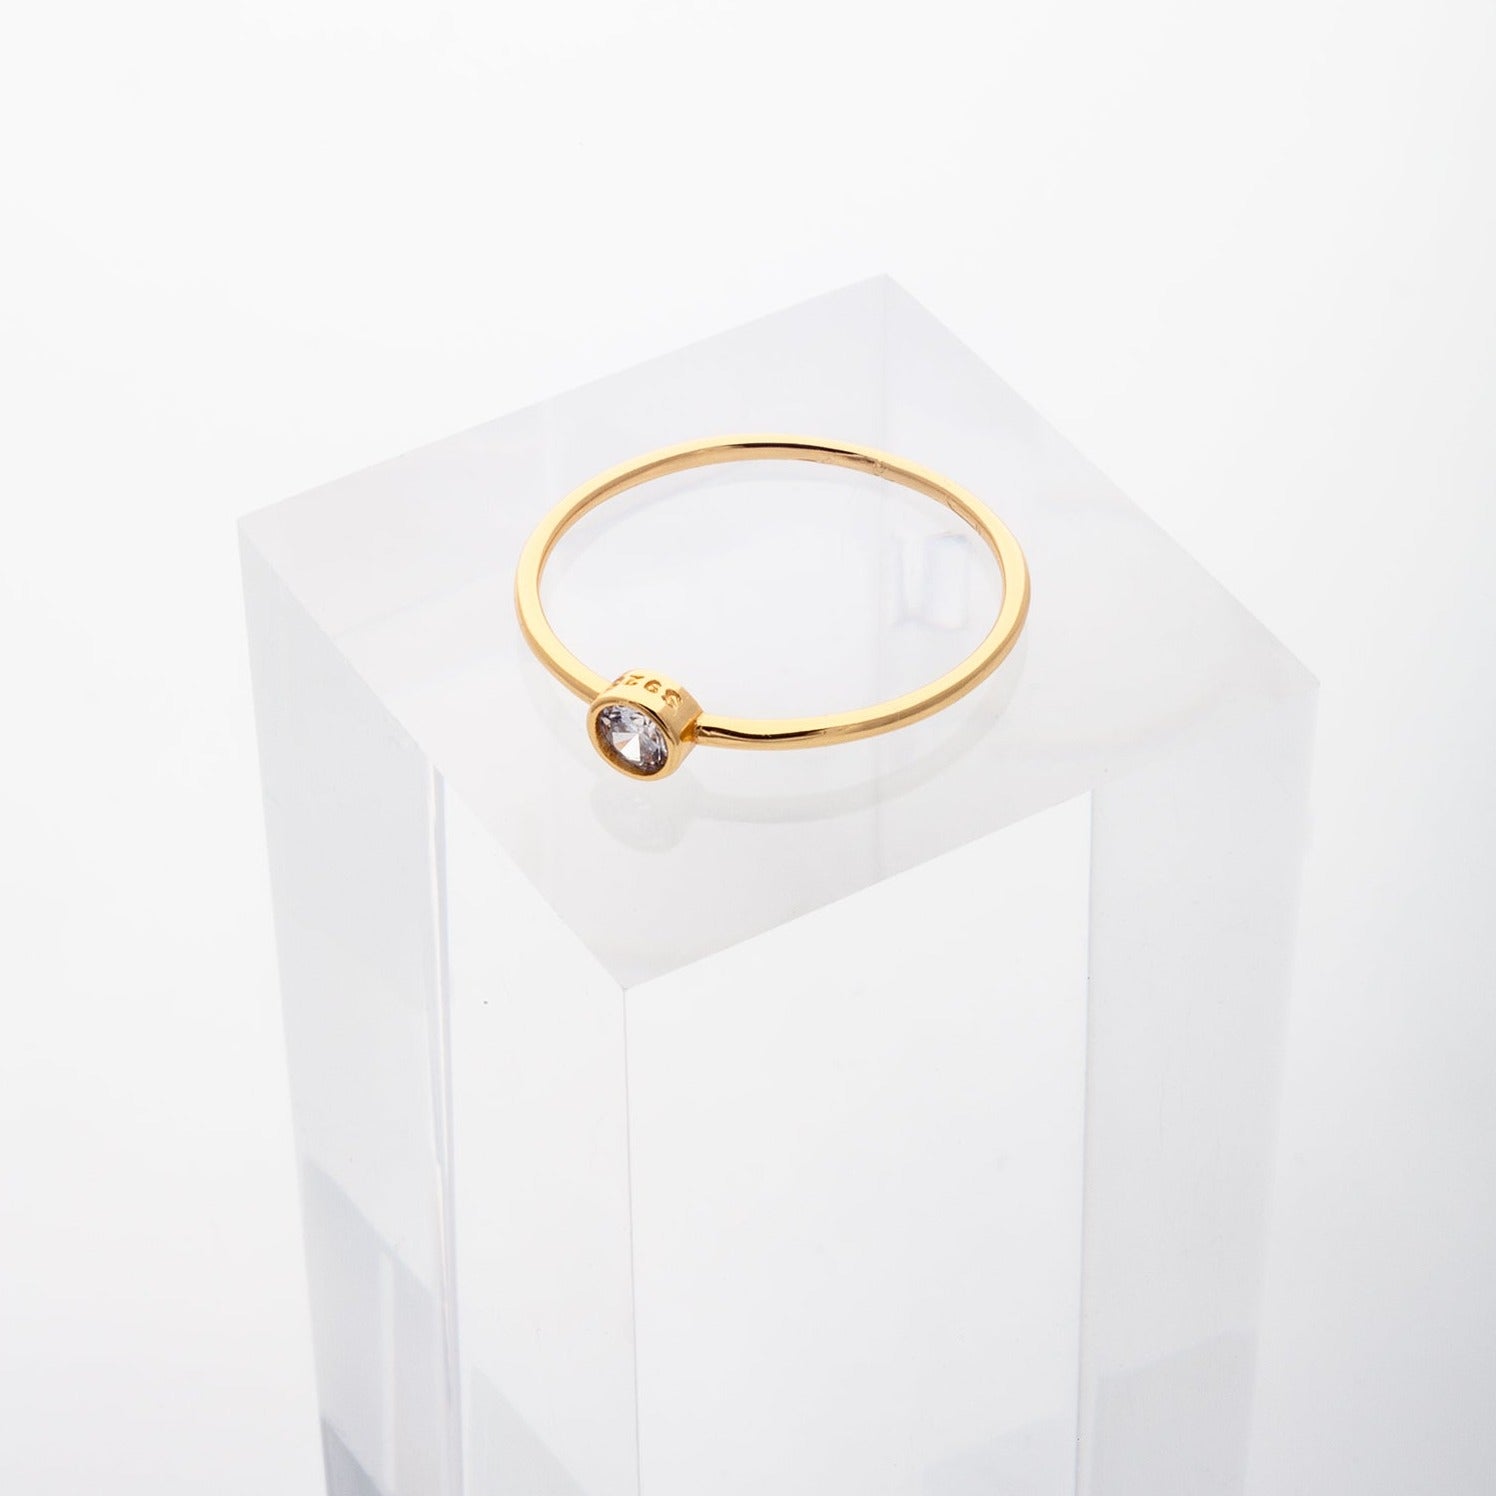 The Classic Ring in Gold